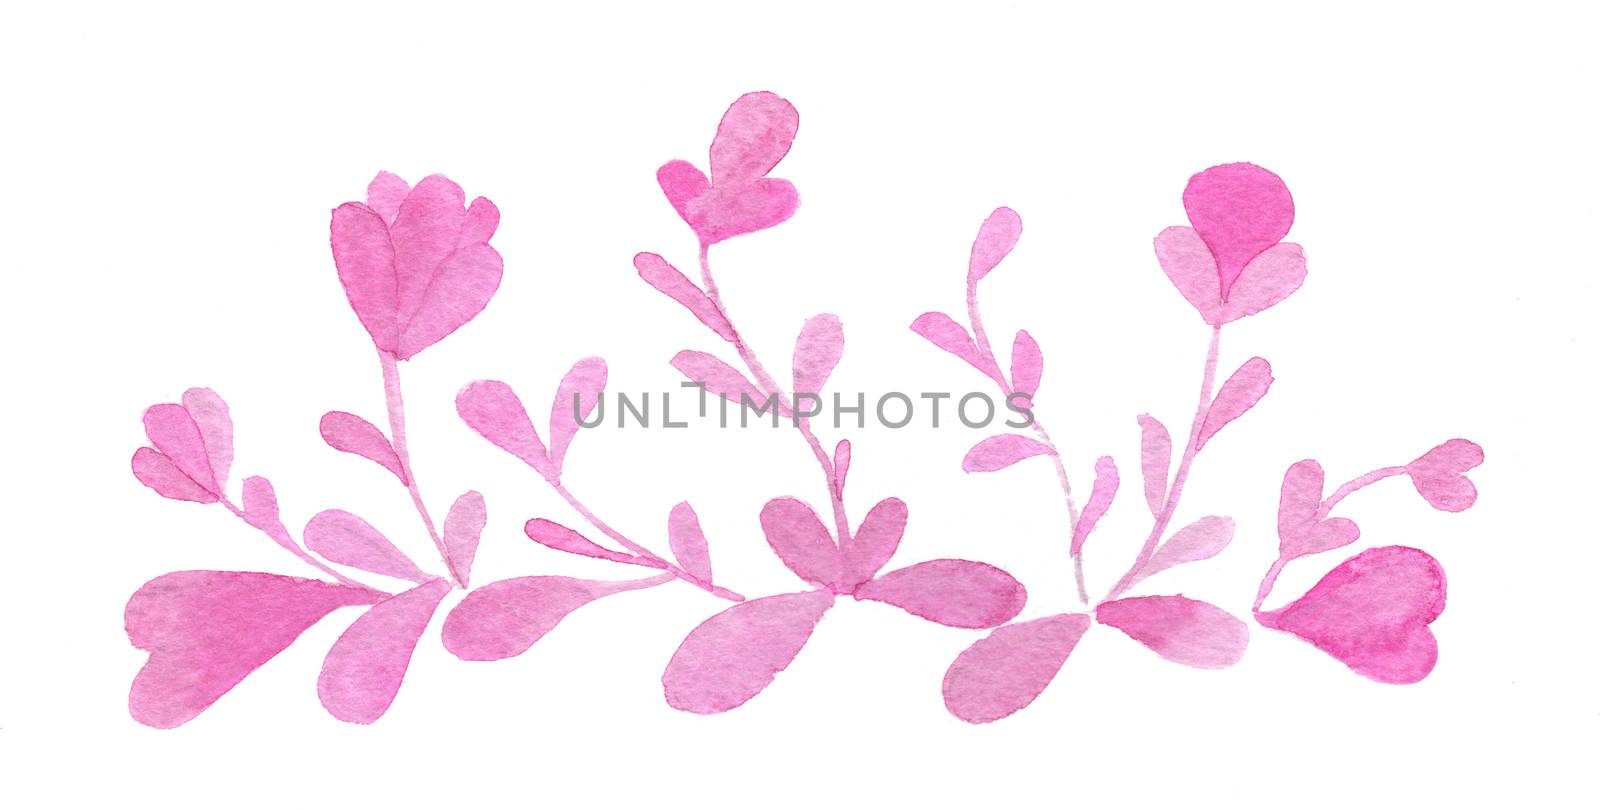 Hand-drawn watercolor flowers and leaves boarder isolated on white by galinasharapova